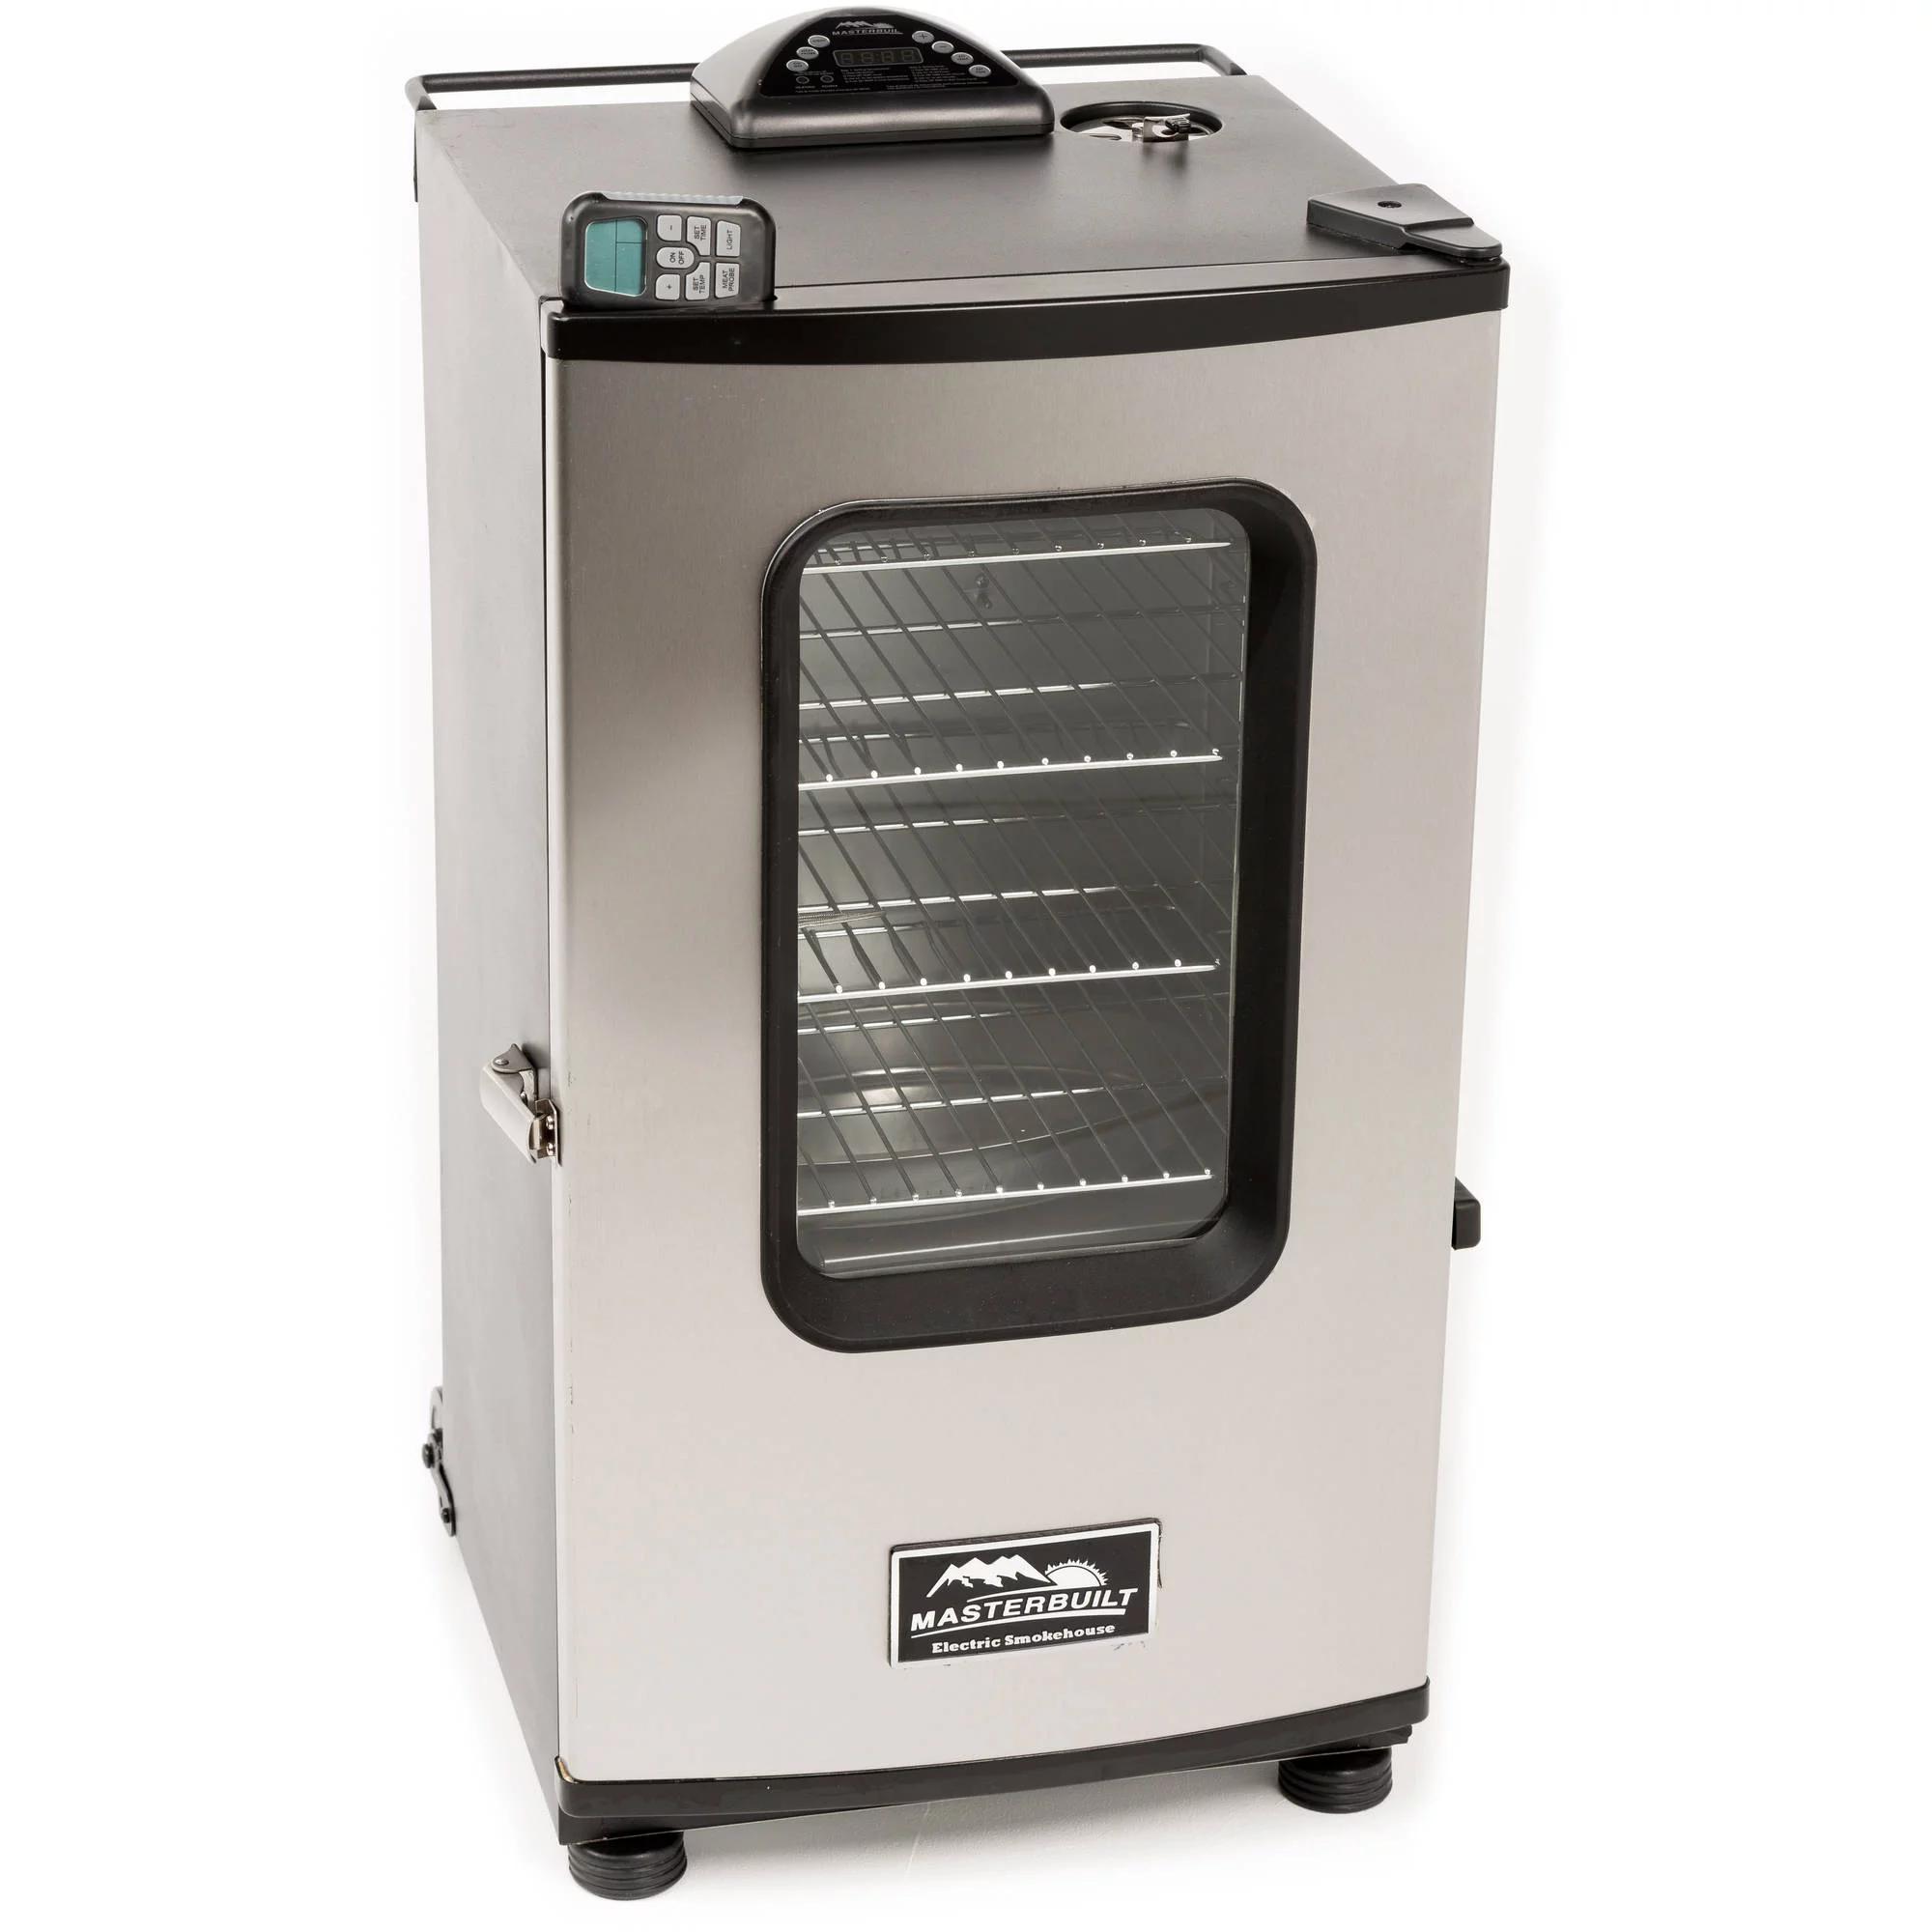 electric smokehouse masterbuilt - What is a Masterbuilt electric smoker